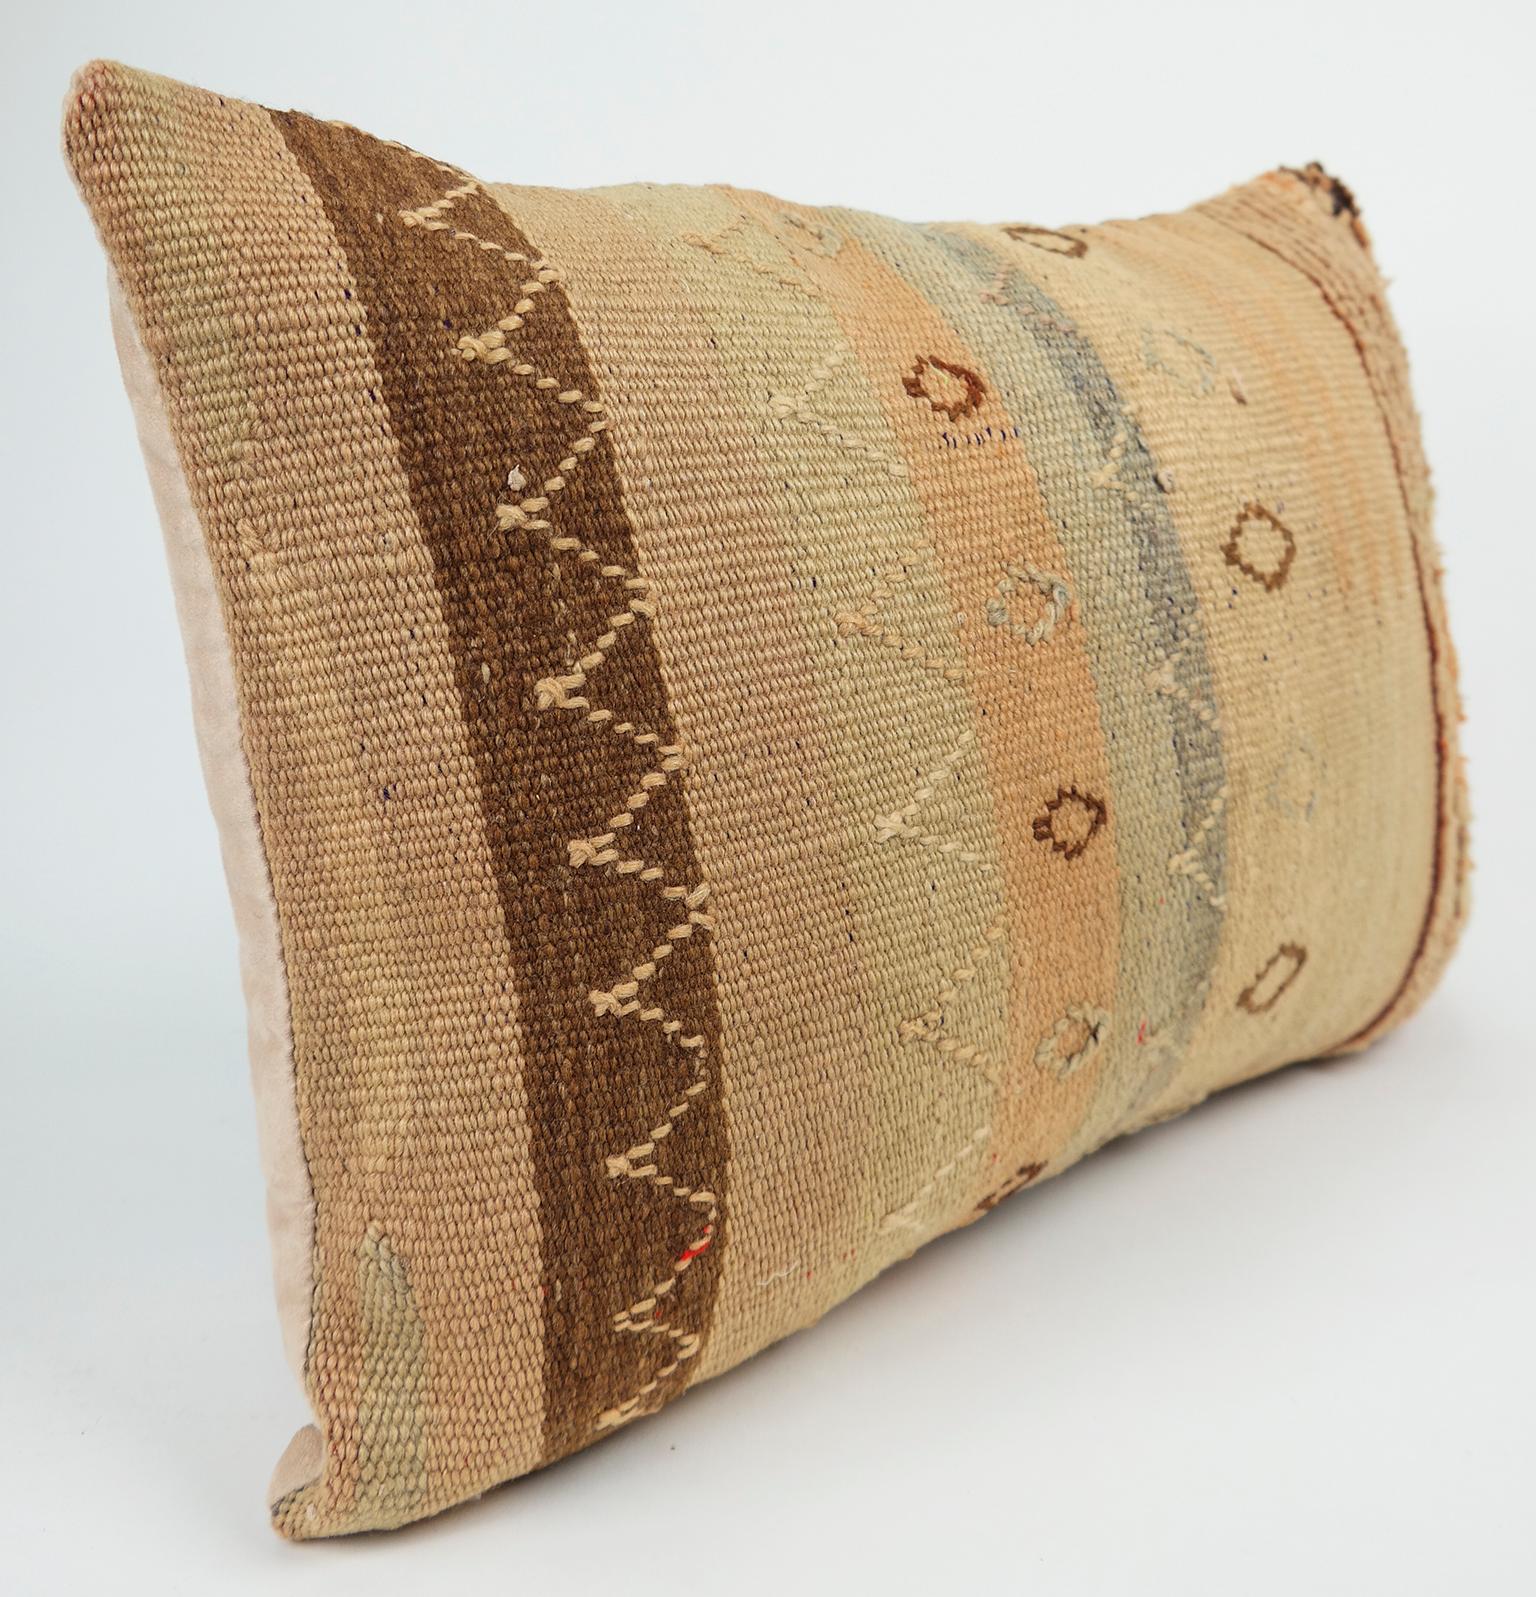 Cushion custom-made from a more than 35 years old Moroccan rug, searched and selected by ourselves. This pillow is a one-of-a-kind with beautiful warm colors. The beauty of our pillows is that they are timeless and blend in every interior. Or